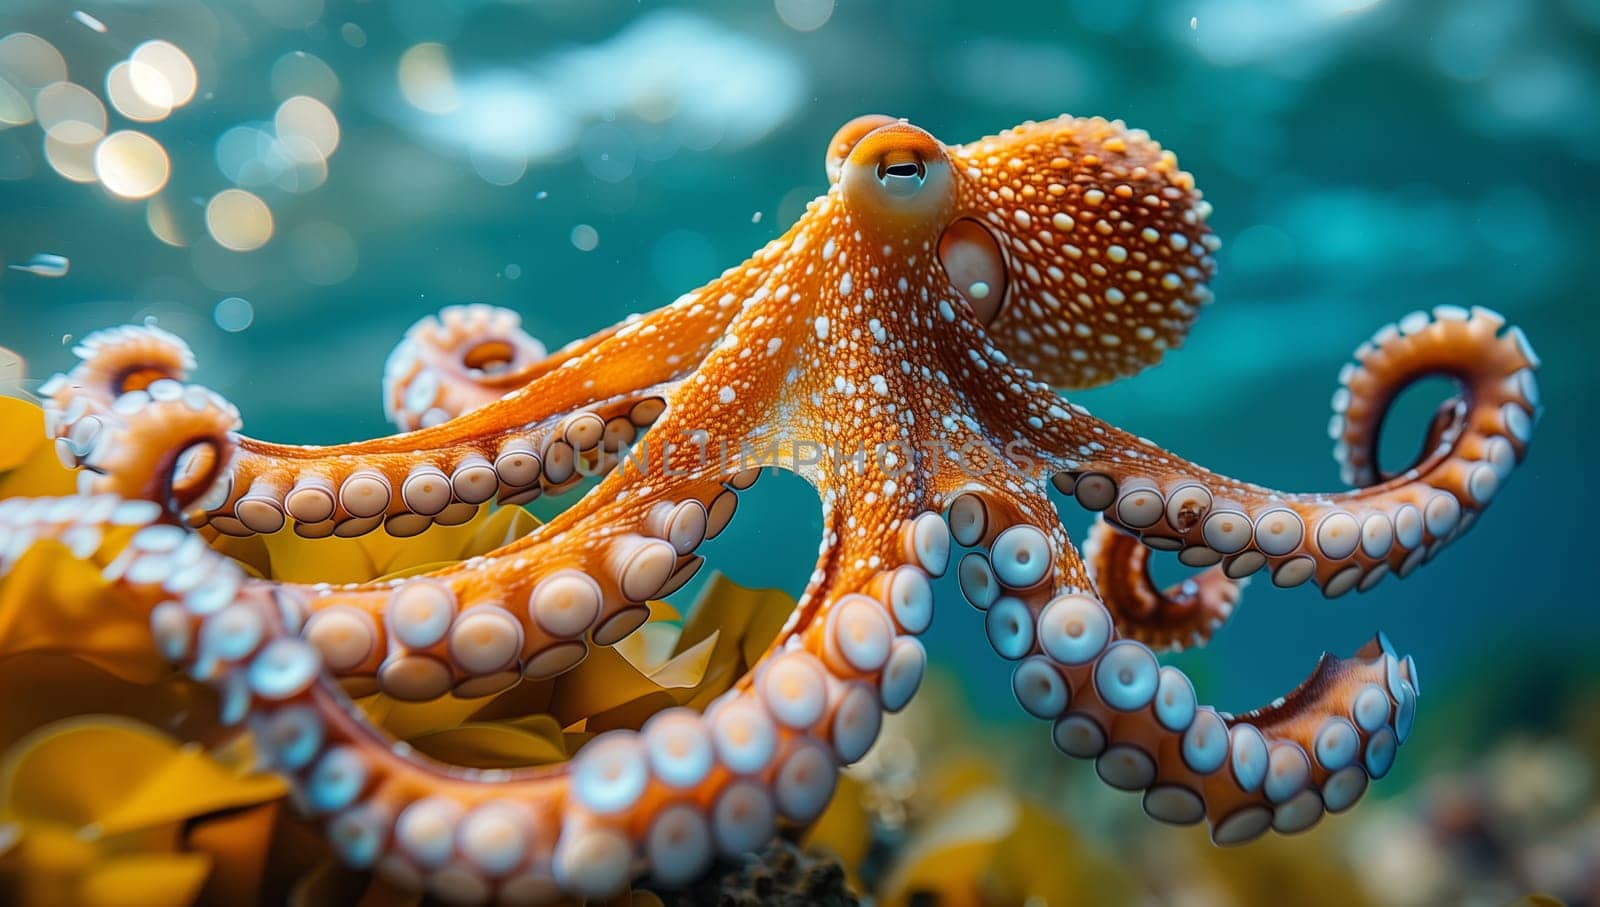 A cephalopod is gracefully moving through the water near a terrestrial plant in the ocean. This fascinating organism is a subject of interest in marine biology and macro photography